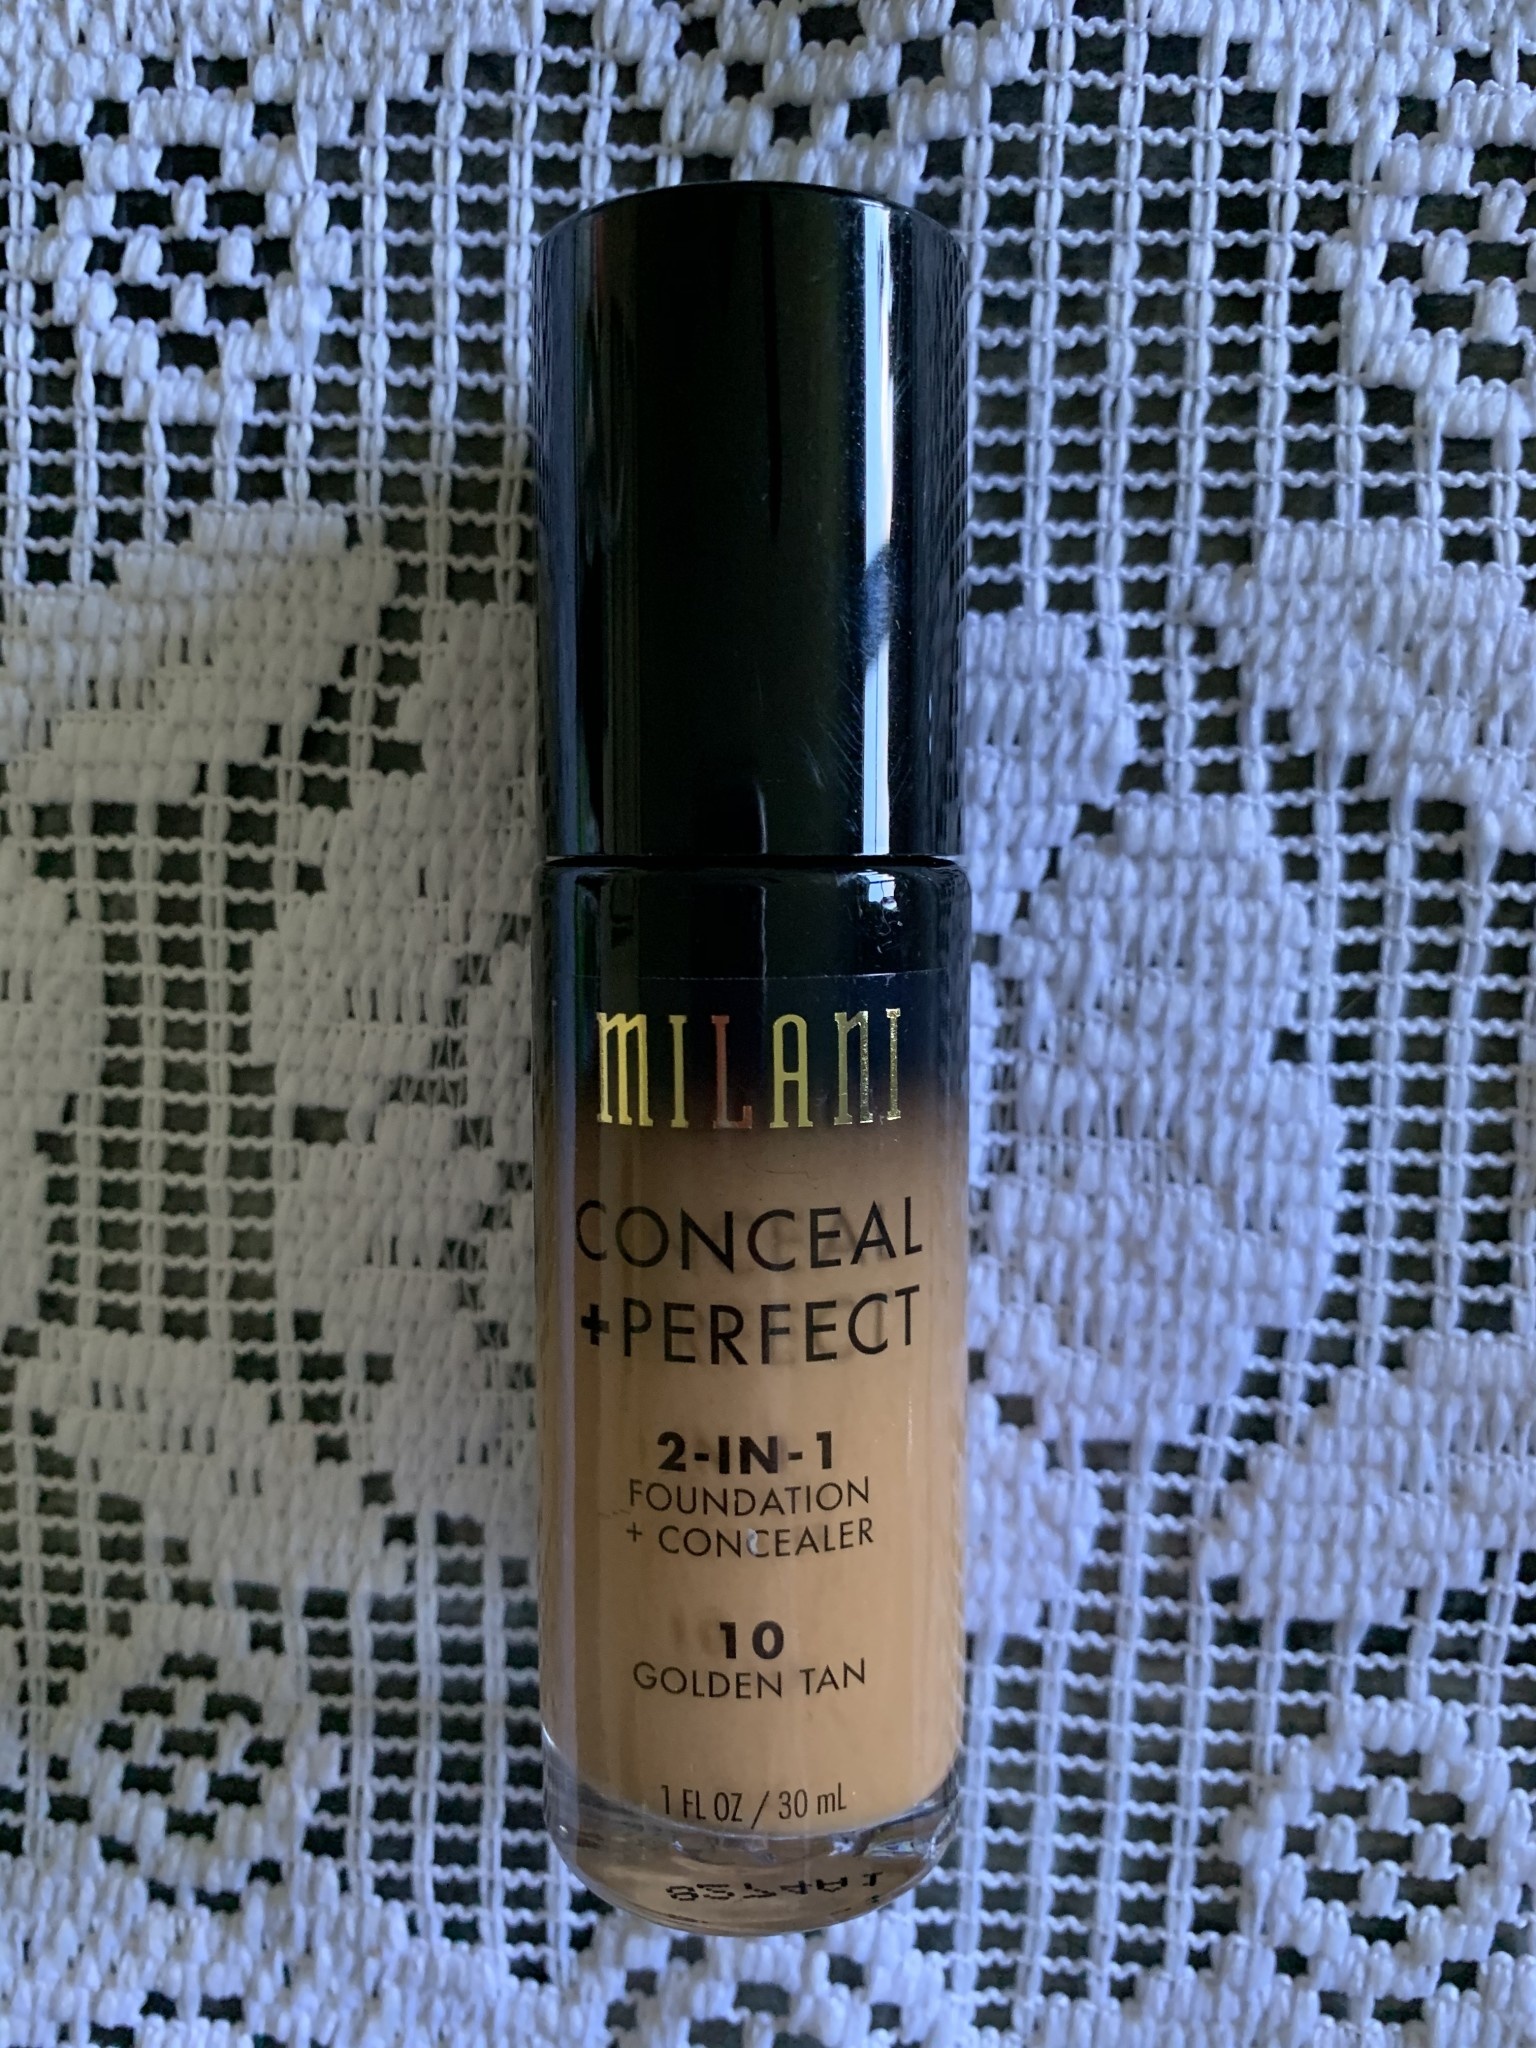 Conceal + Perfect 2-in-1 Foundation 10 Golden Tan - 1 fl oz - D3 Surplus Outlet